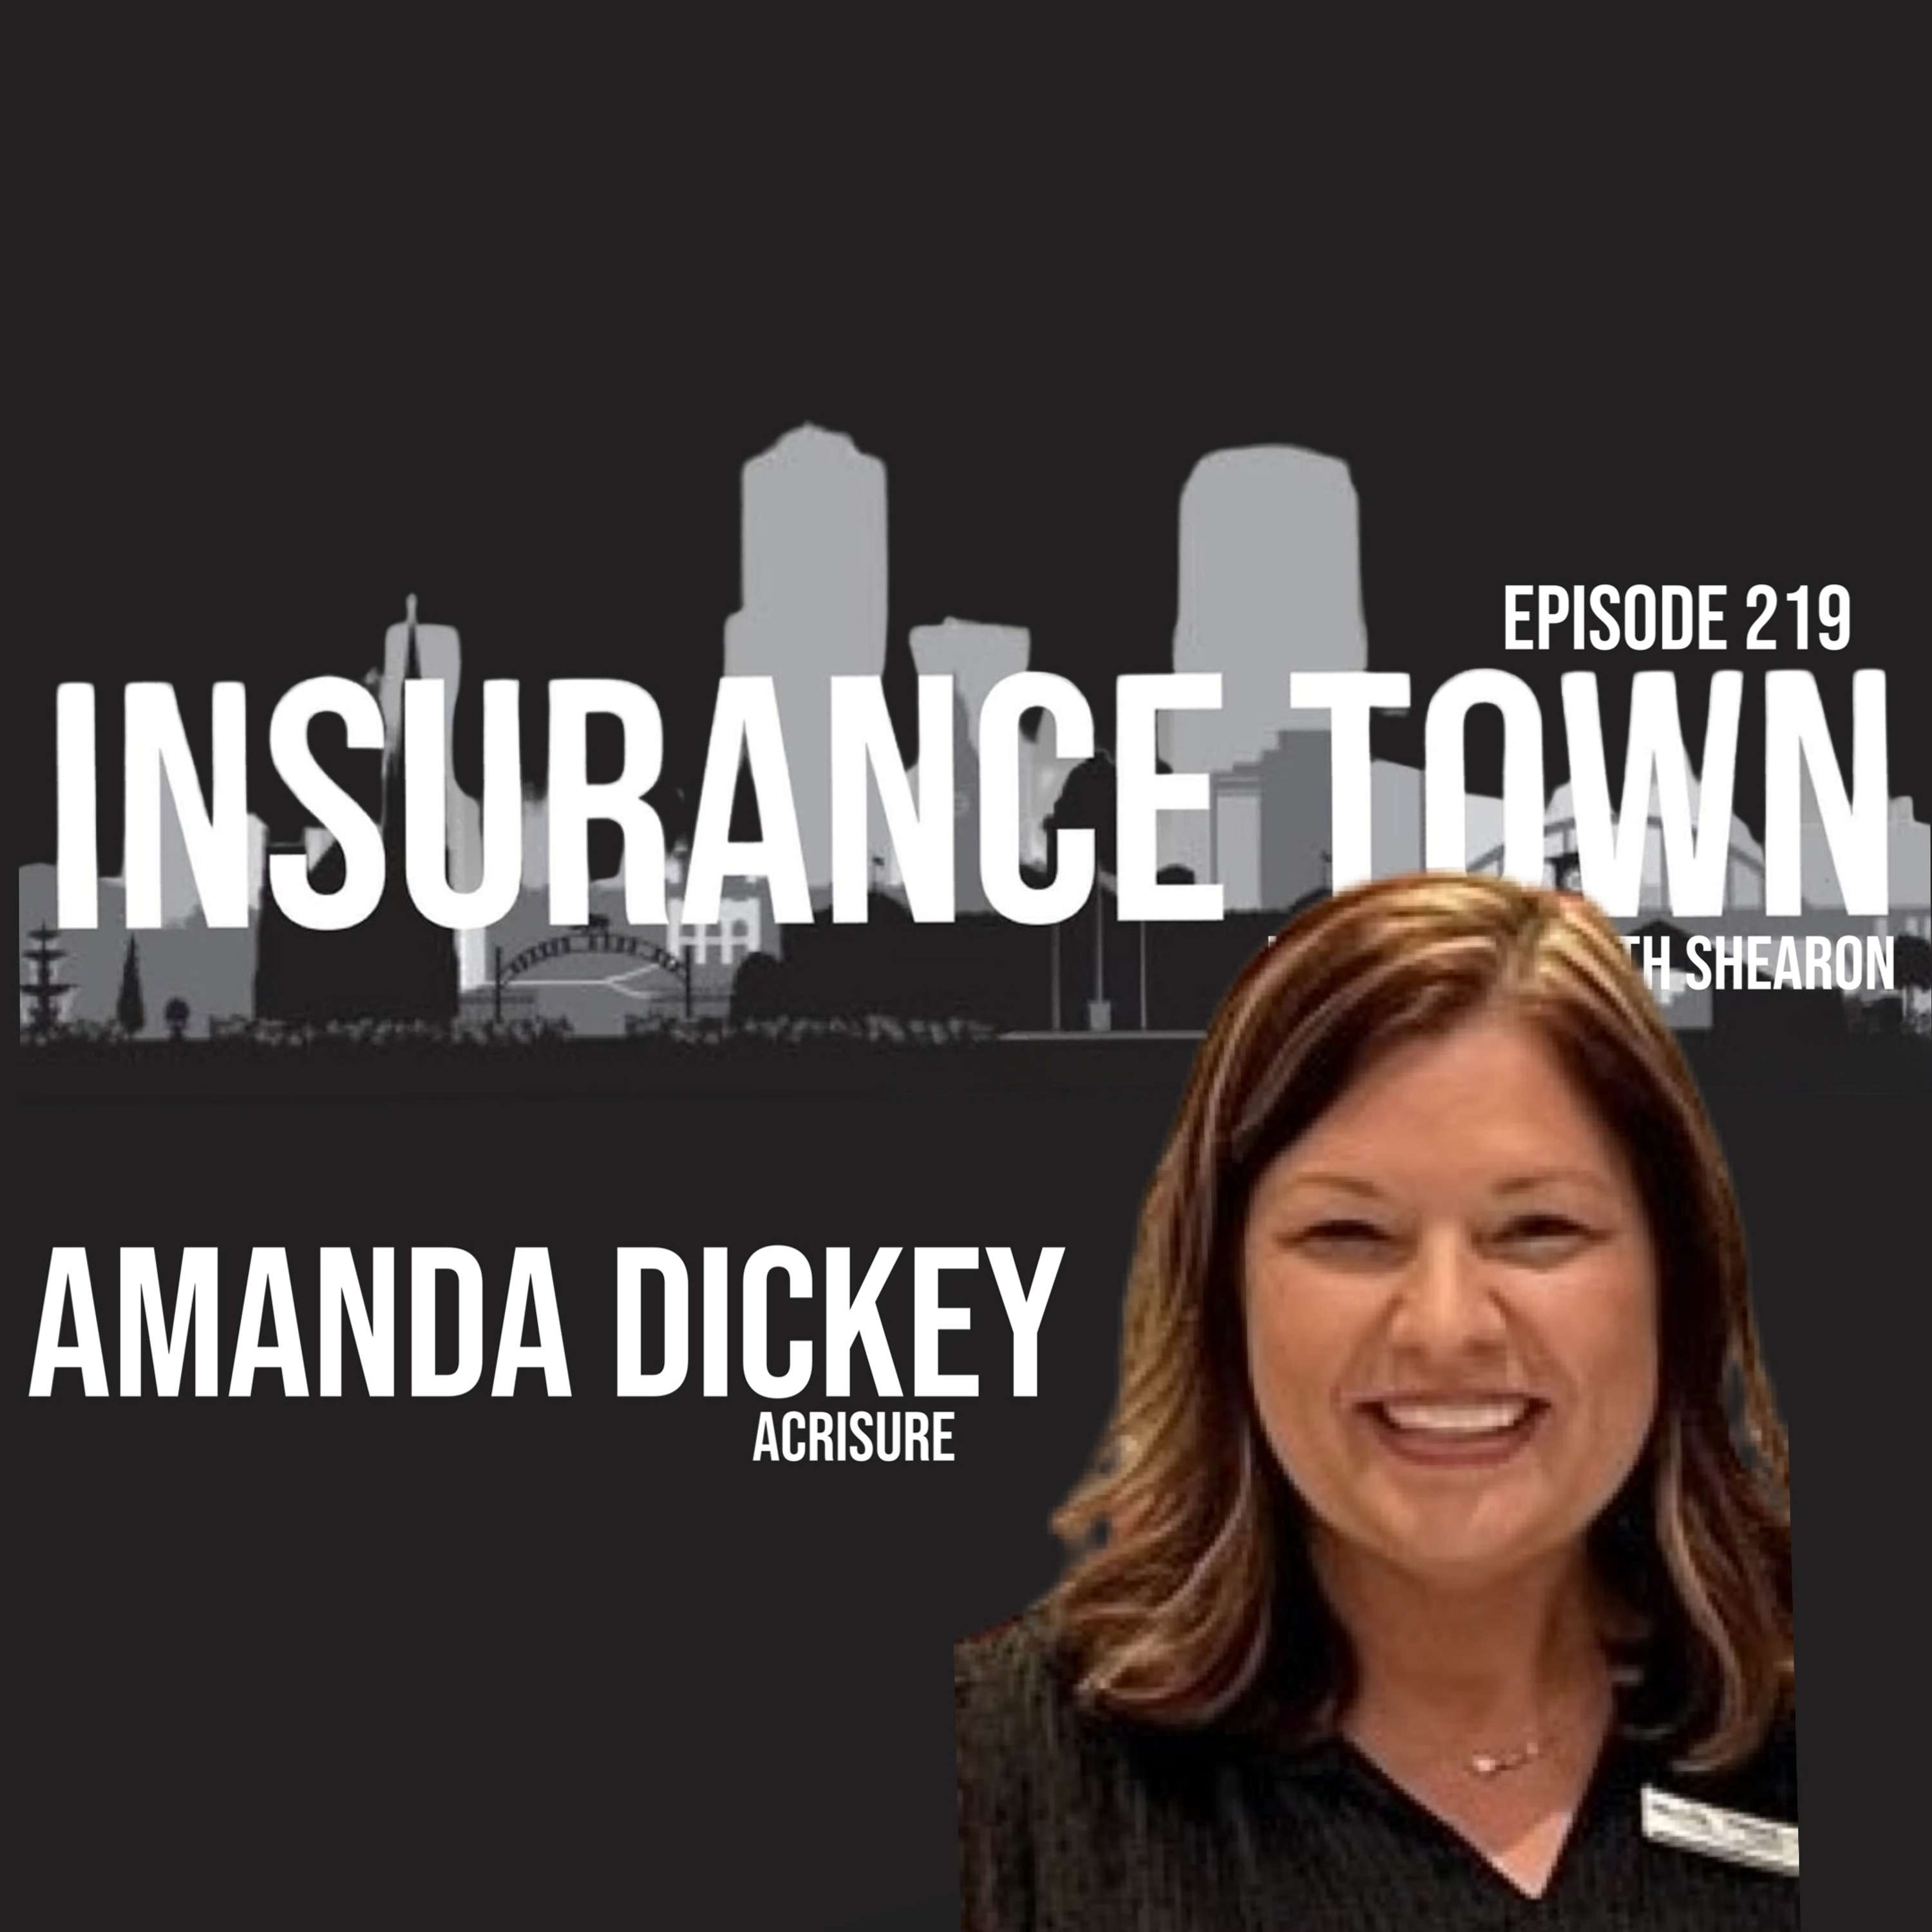 Amanda Dickey- "The Account Manager Manager"